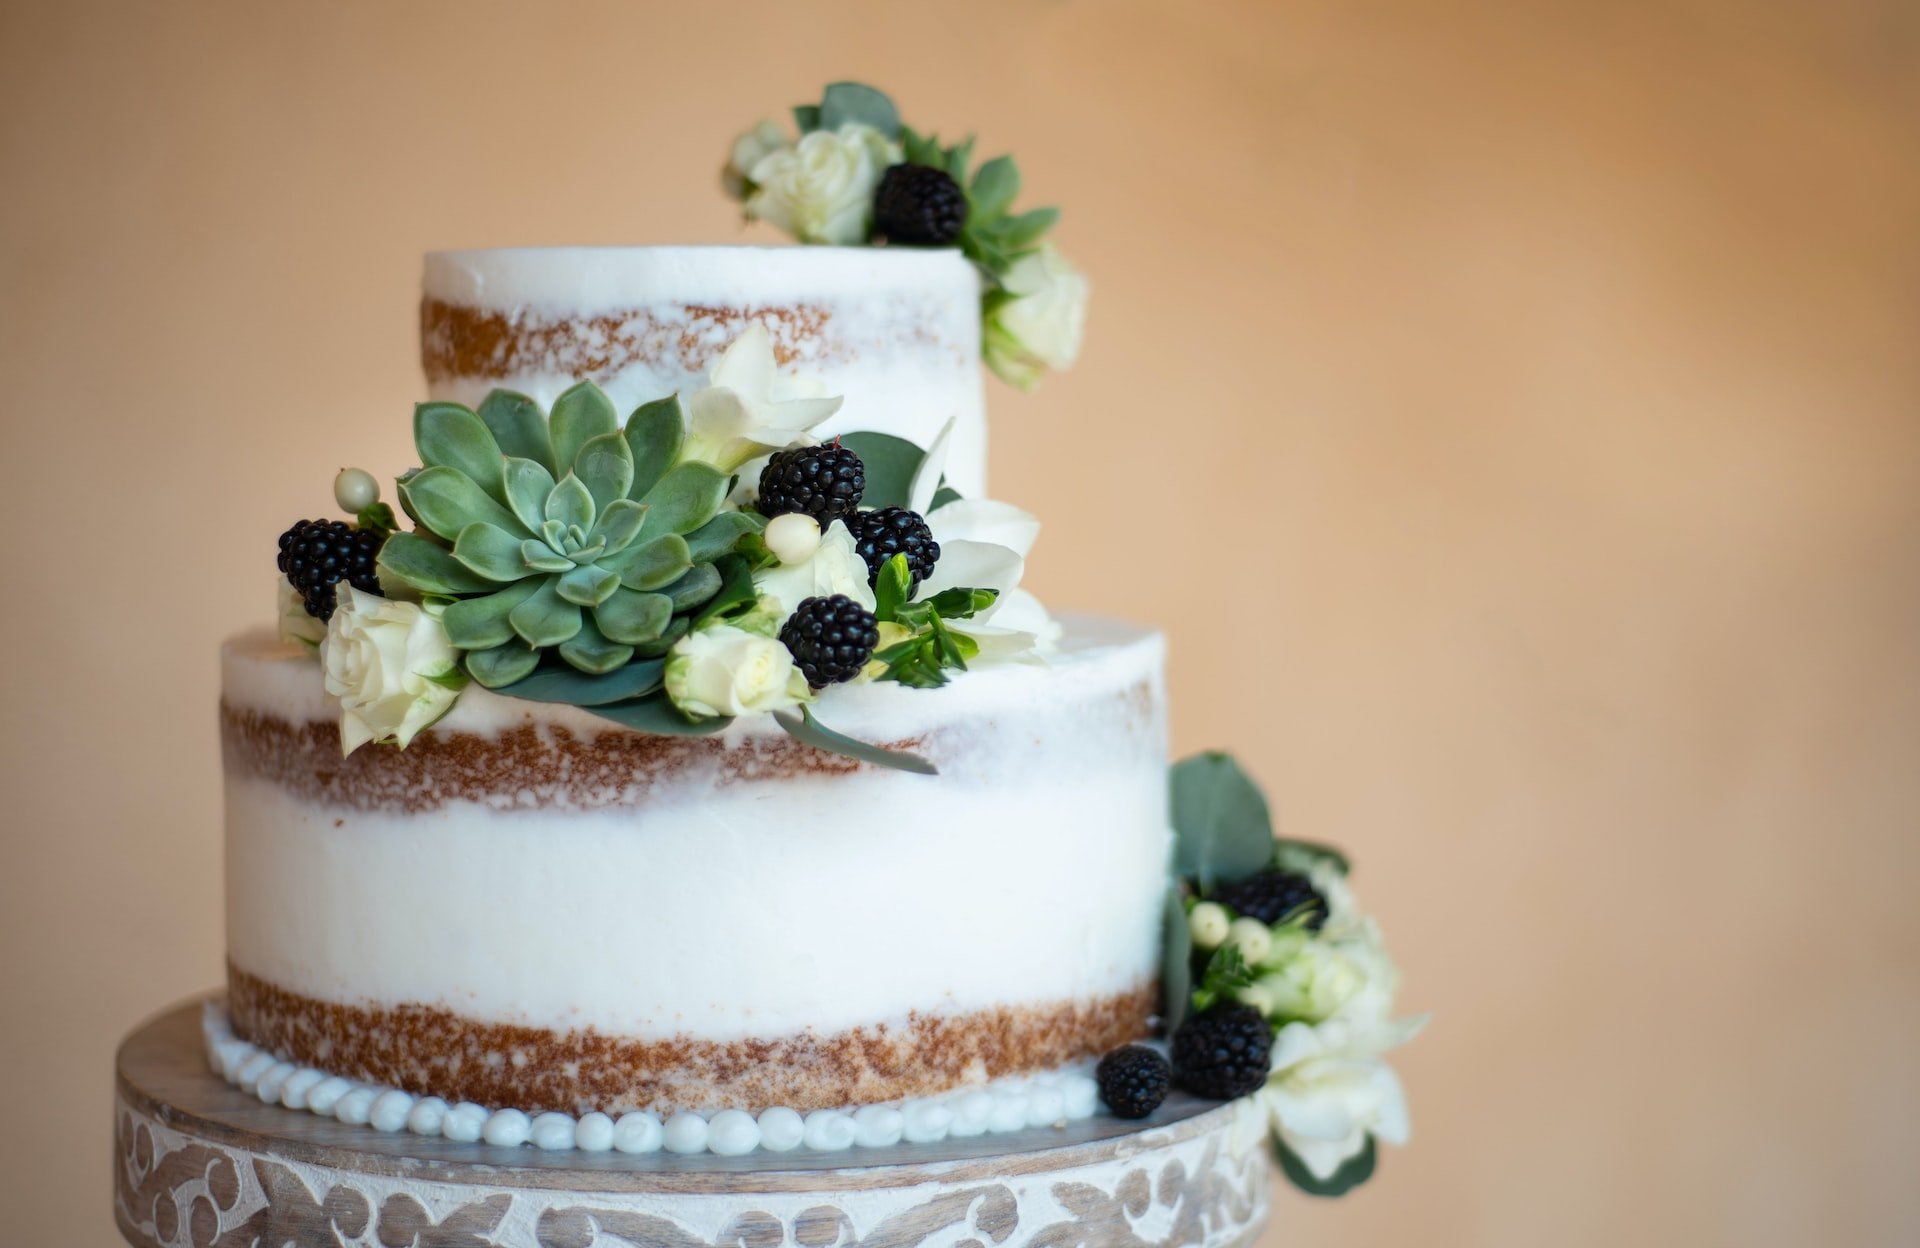 Layered cake with blackberry and rose decoration